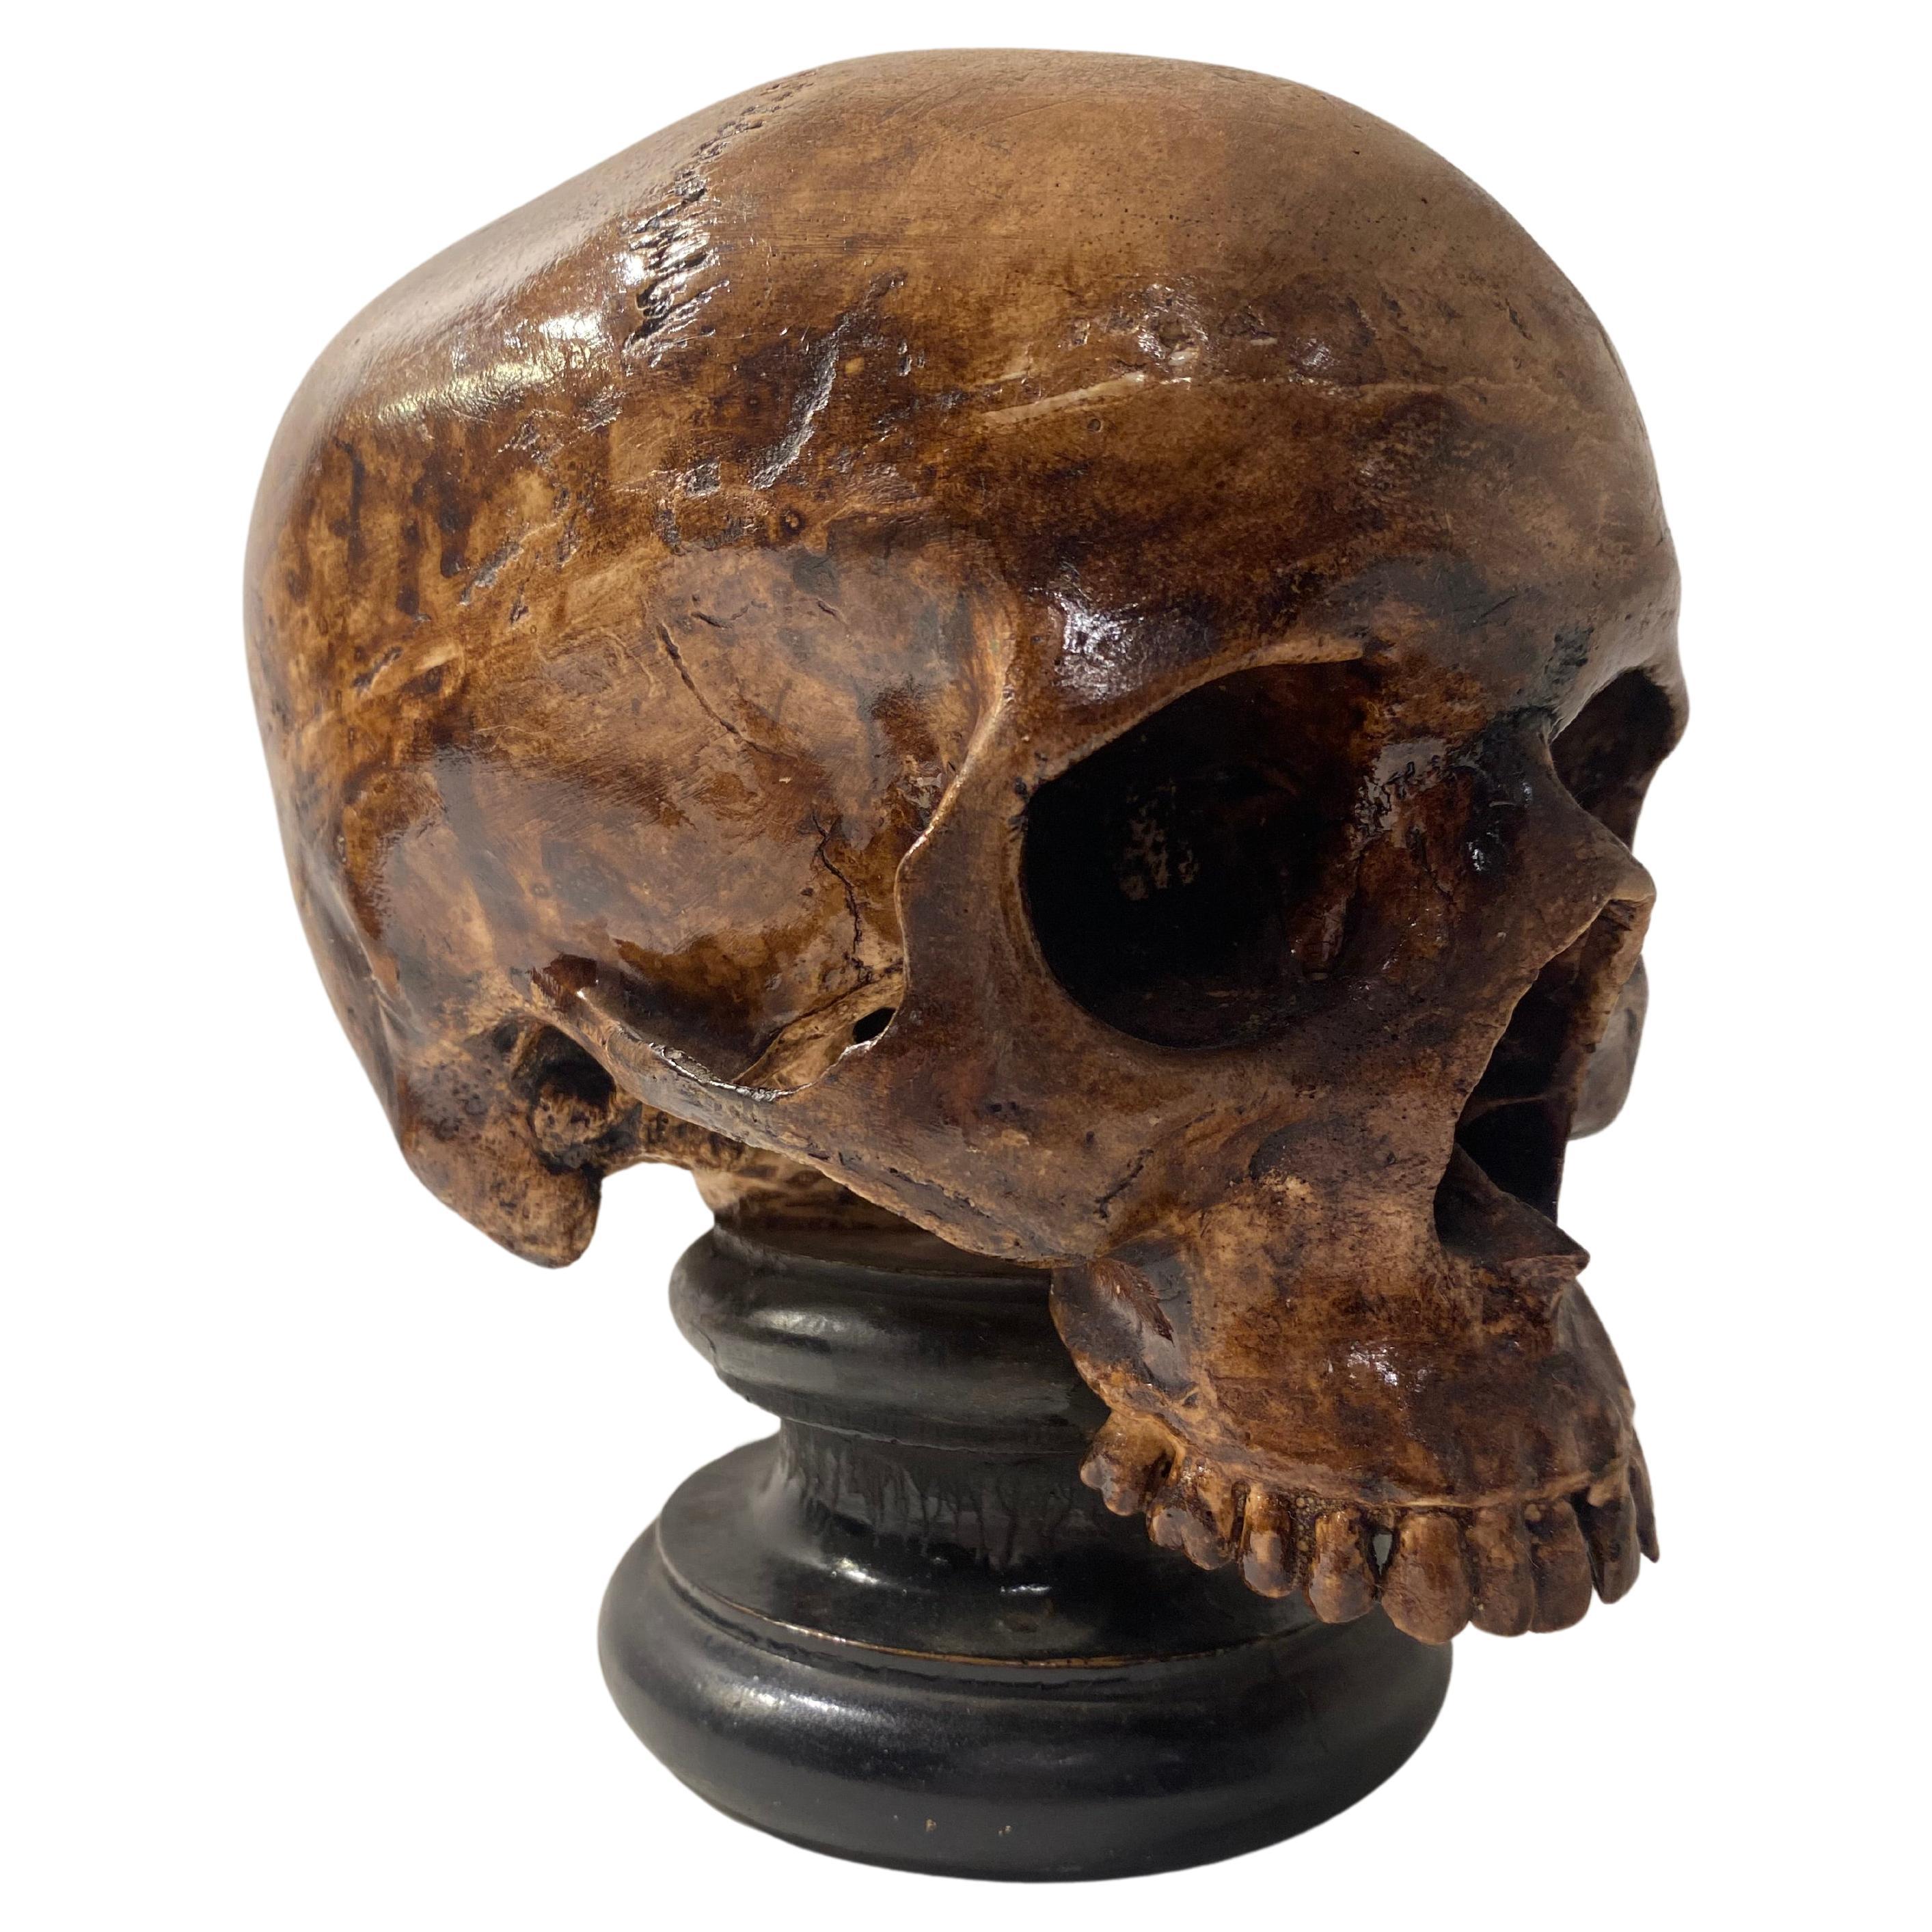  Exceptional Terracotta Skull For Sale